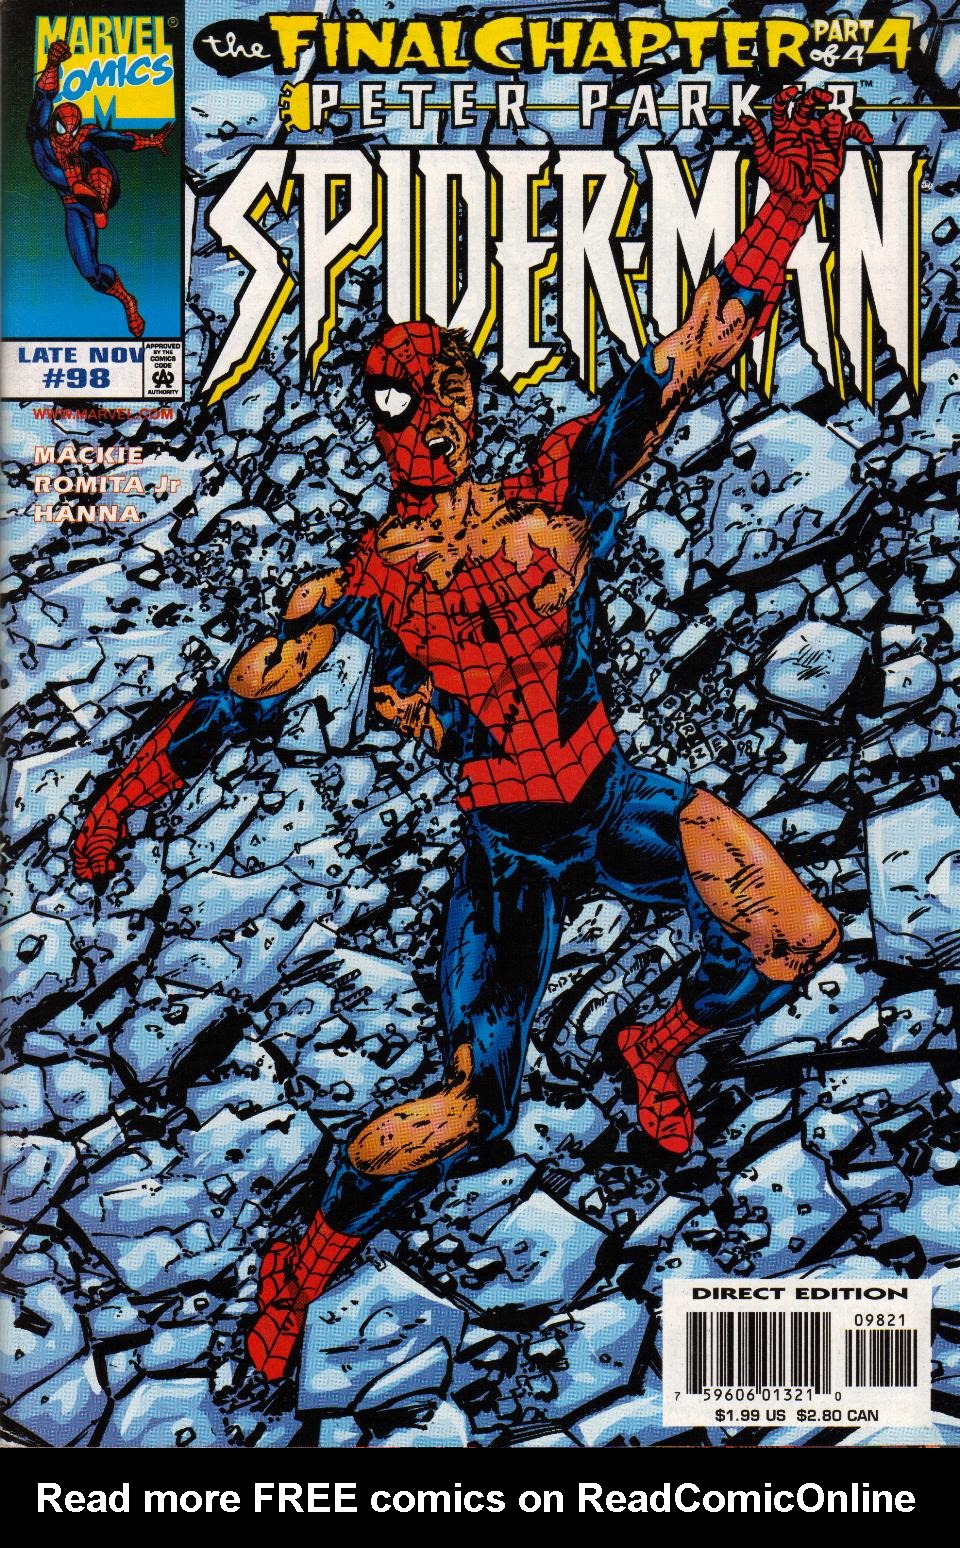 Spider-Man (1990) issue 98 - The Final Chapter 4 of 4 - Page 1